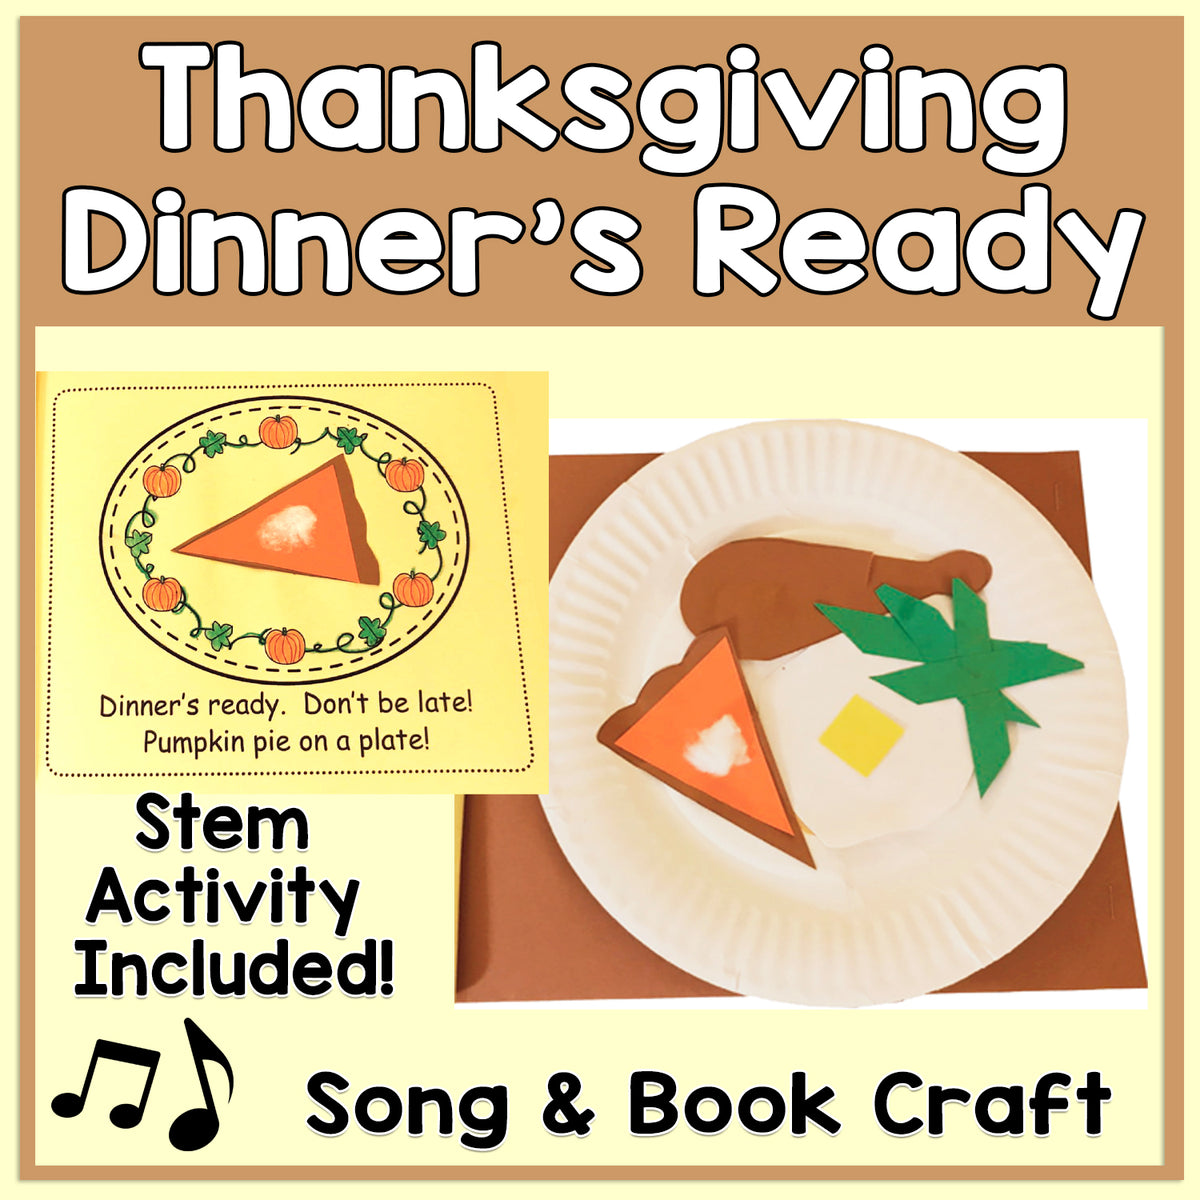 Thanksgiving Dinner's Ready Song & Book Craft